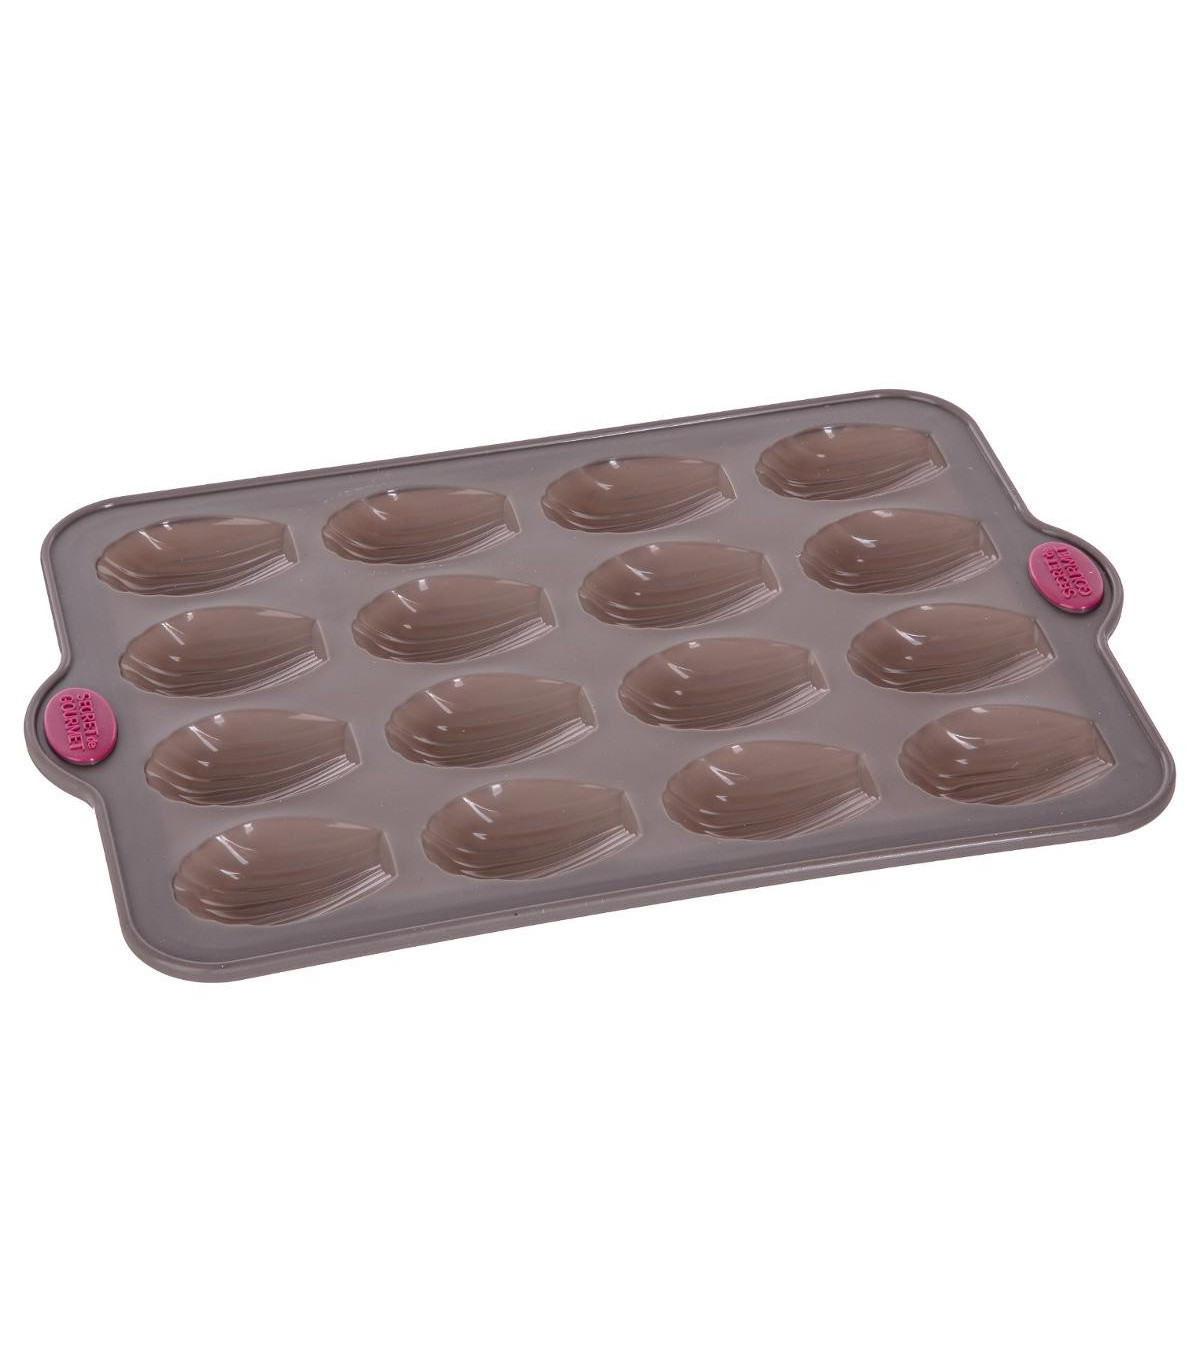 https://www.ravate.com/77489/moule-silicone-silitop-16-madeleines.jpg